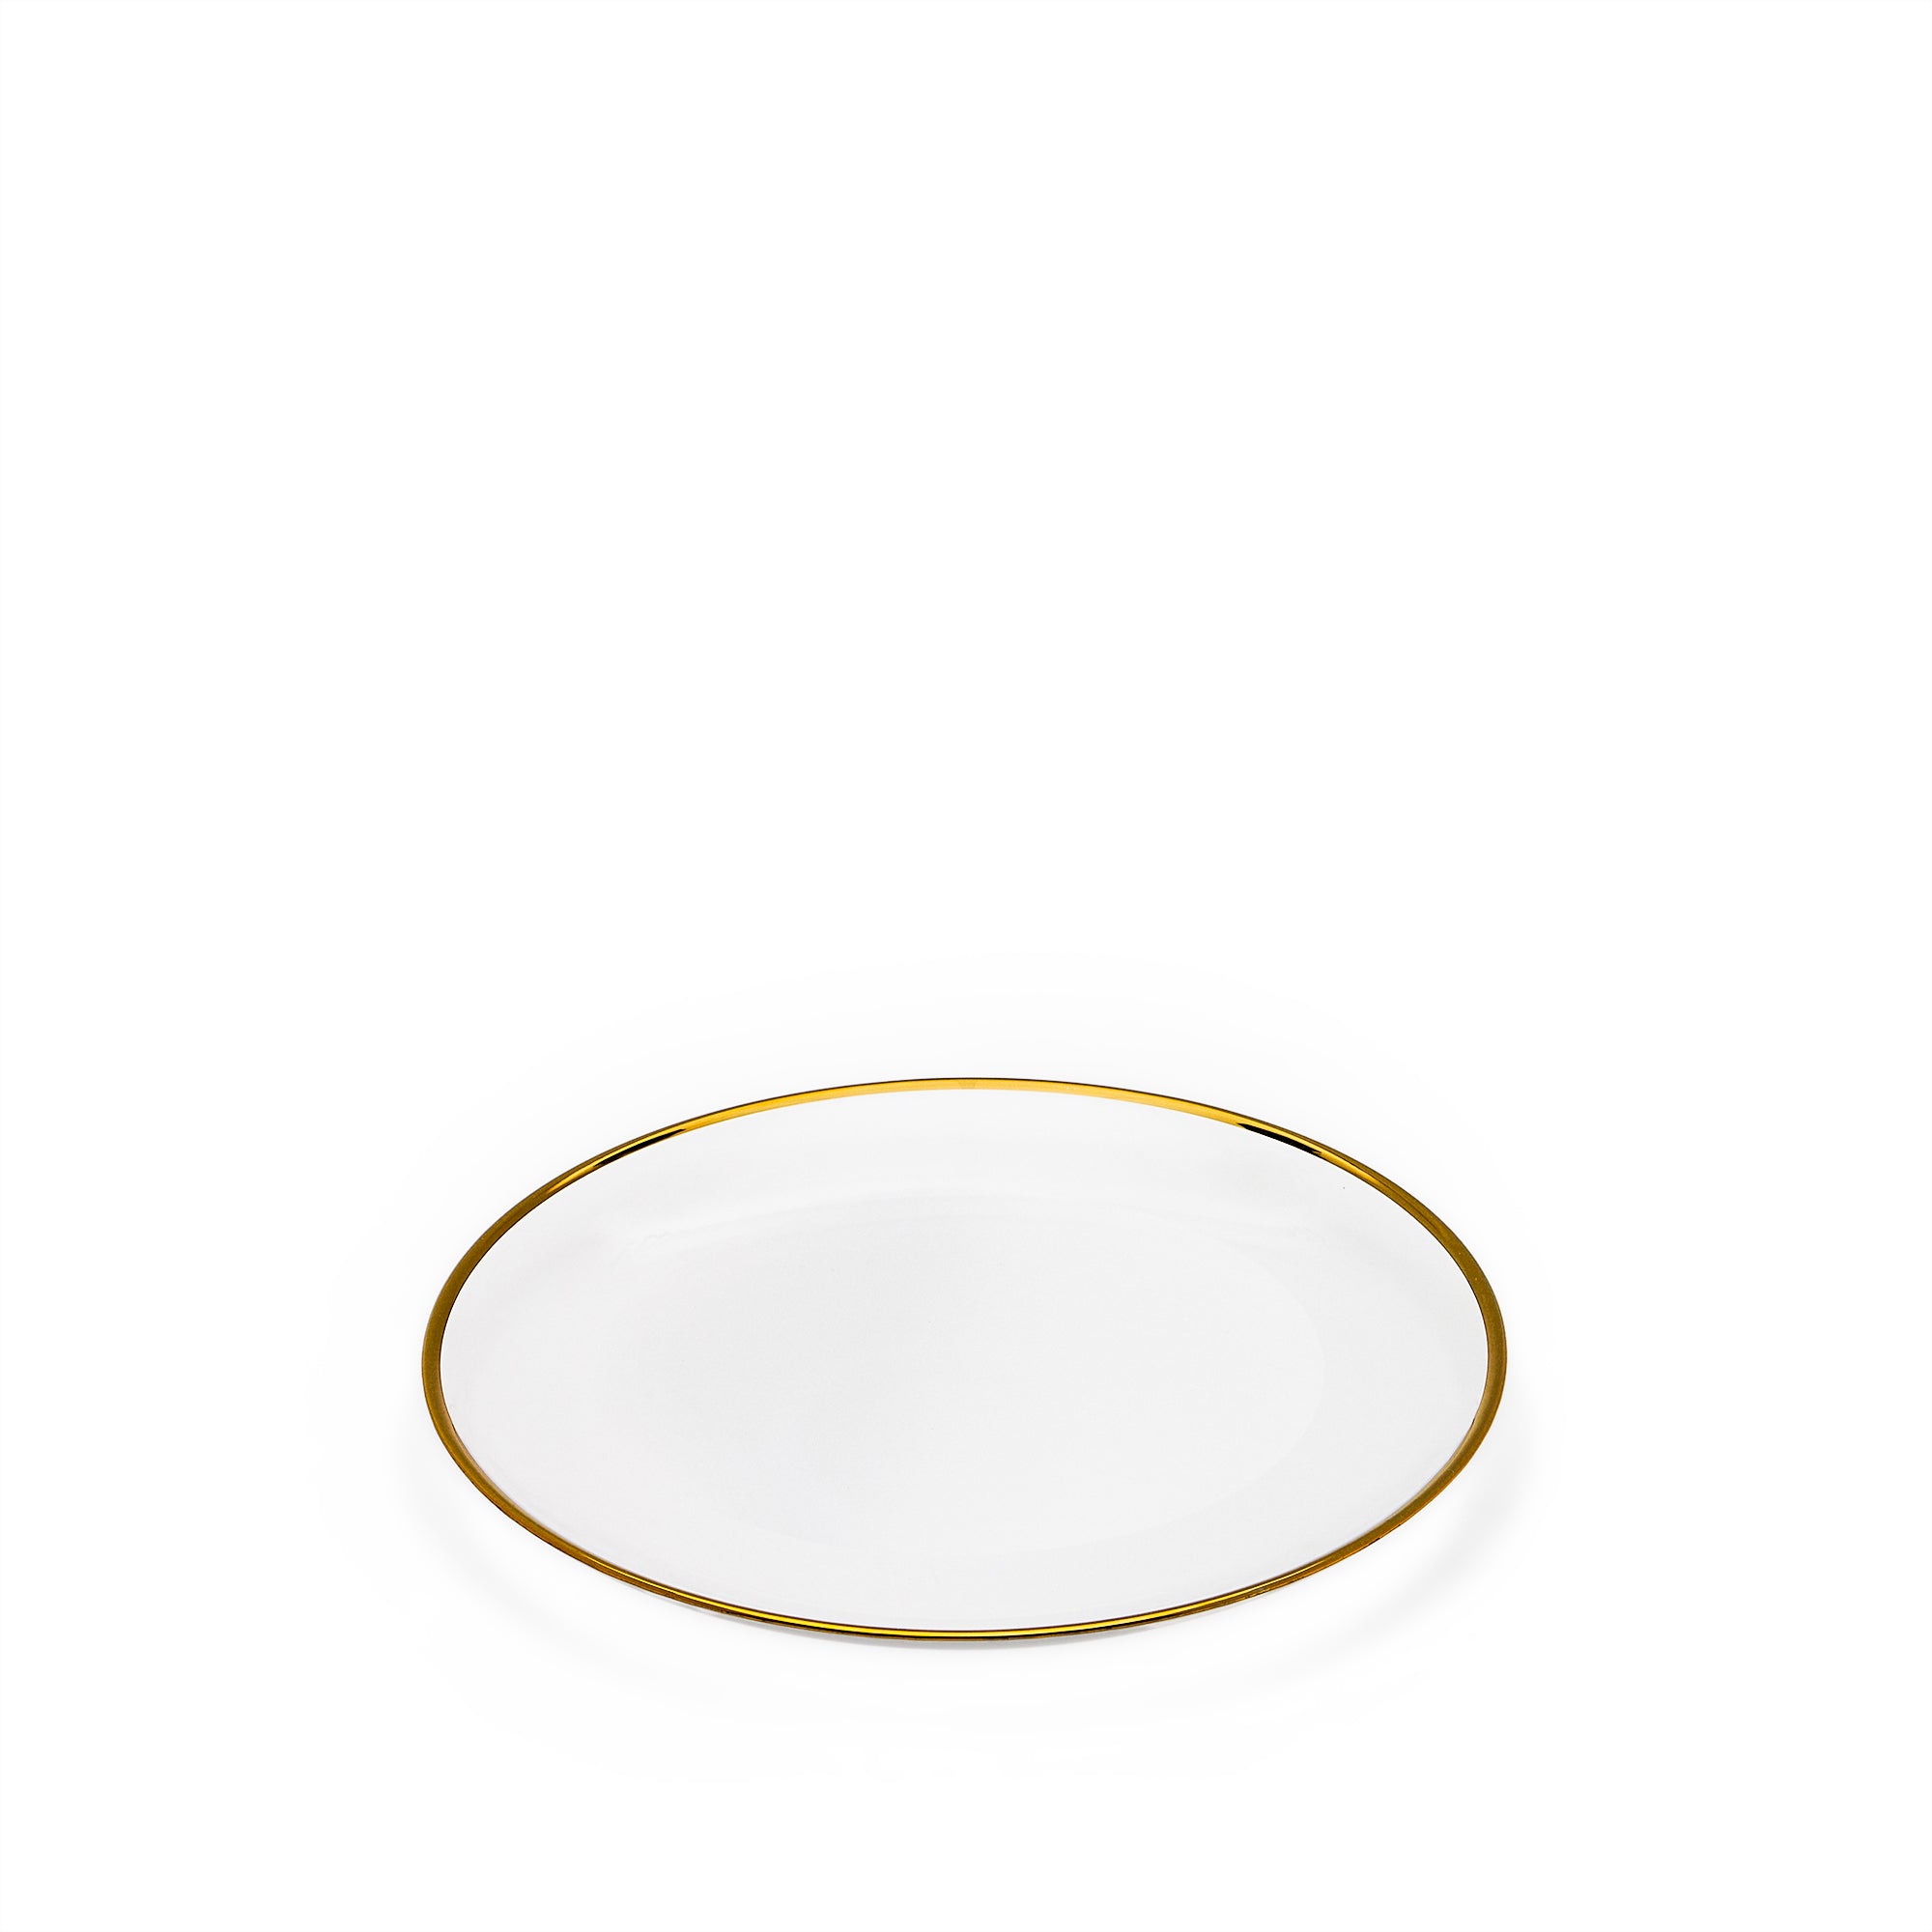 Nelie flat plate with golden edges